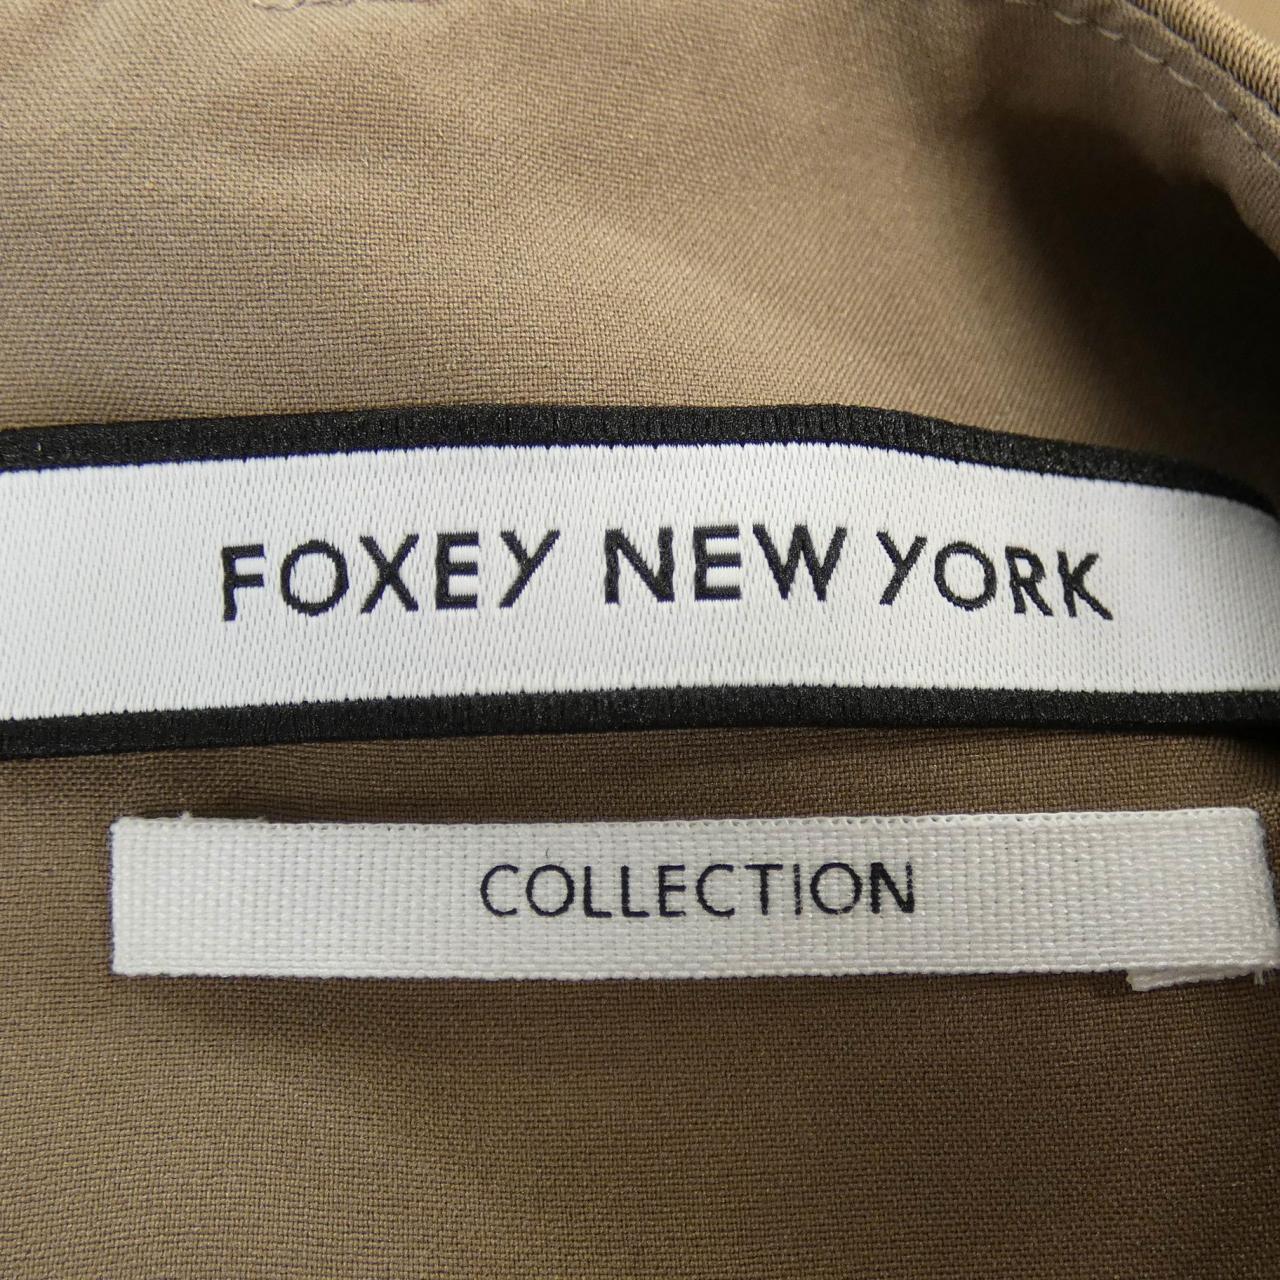 FOXEY NEW YORK COLLECTION グレー ワンピース - ひざ丈ワンピース